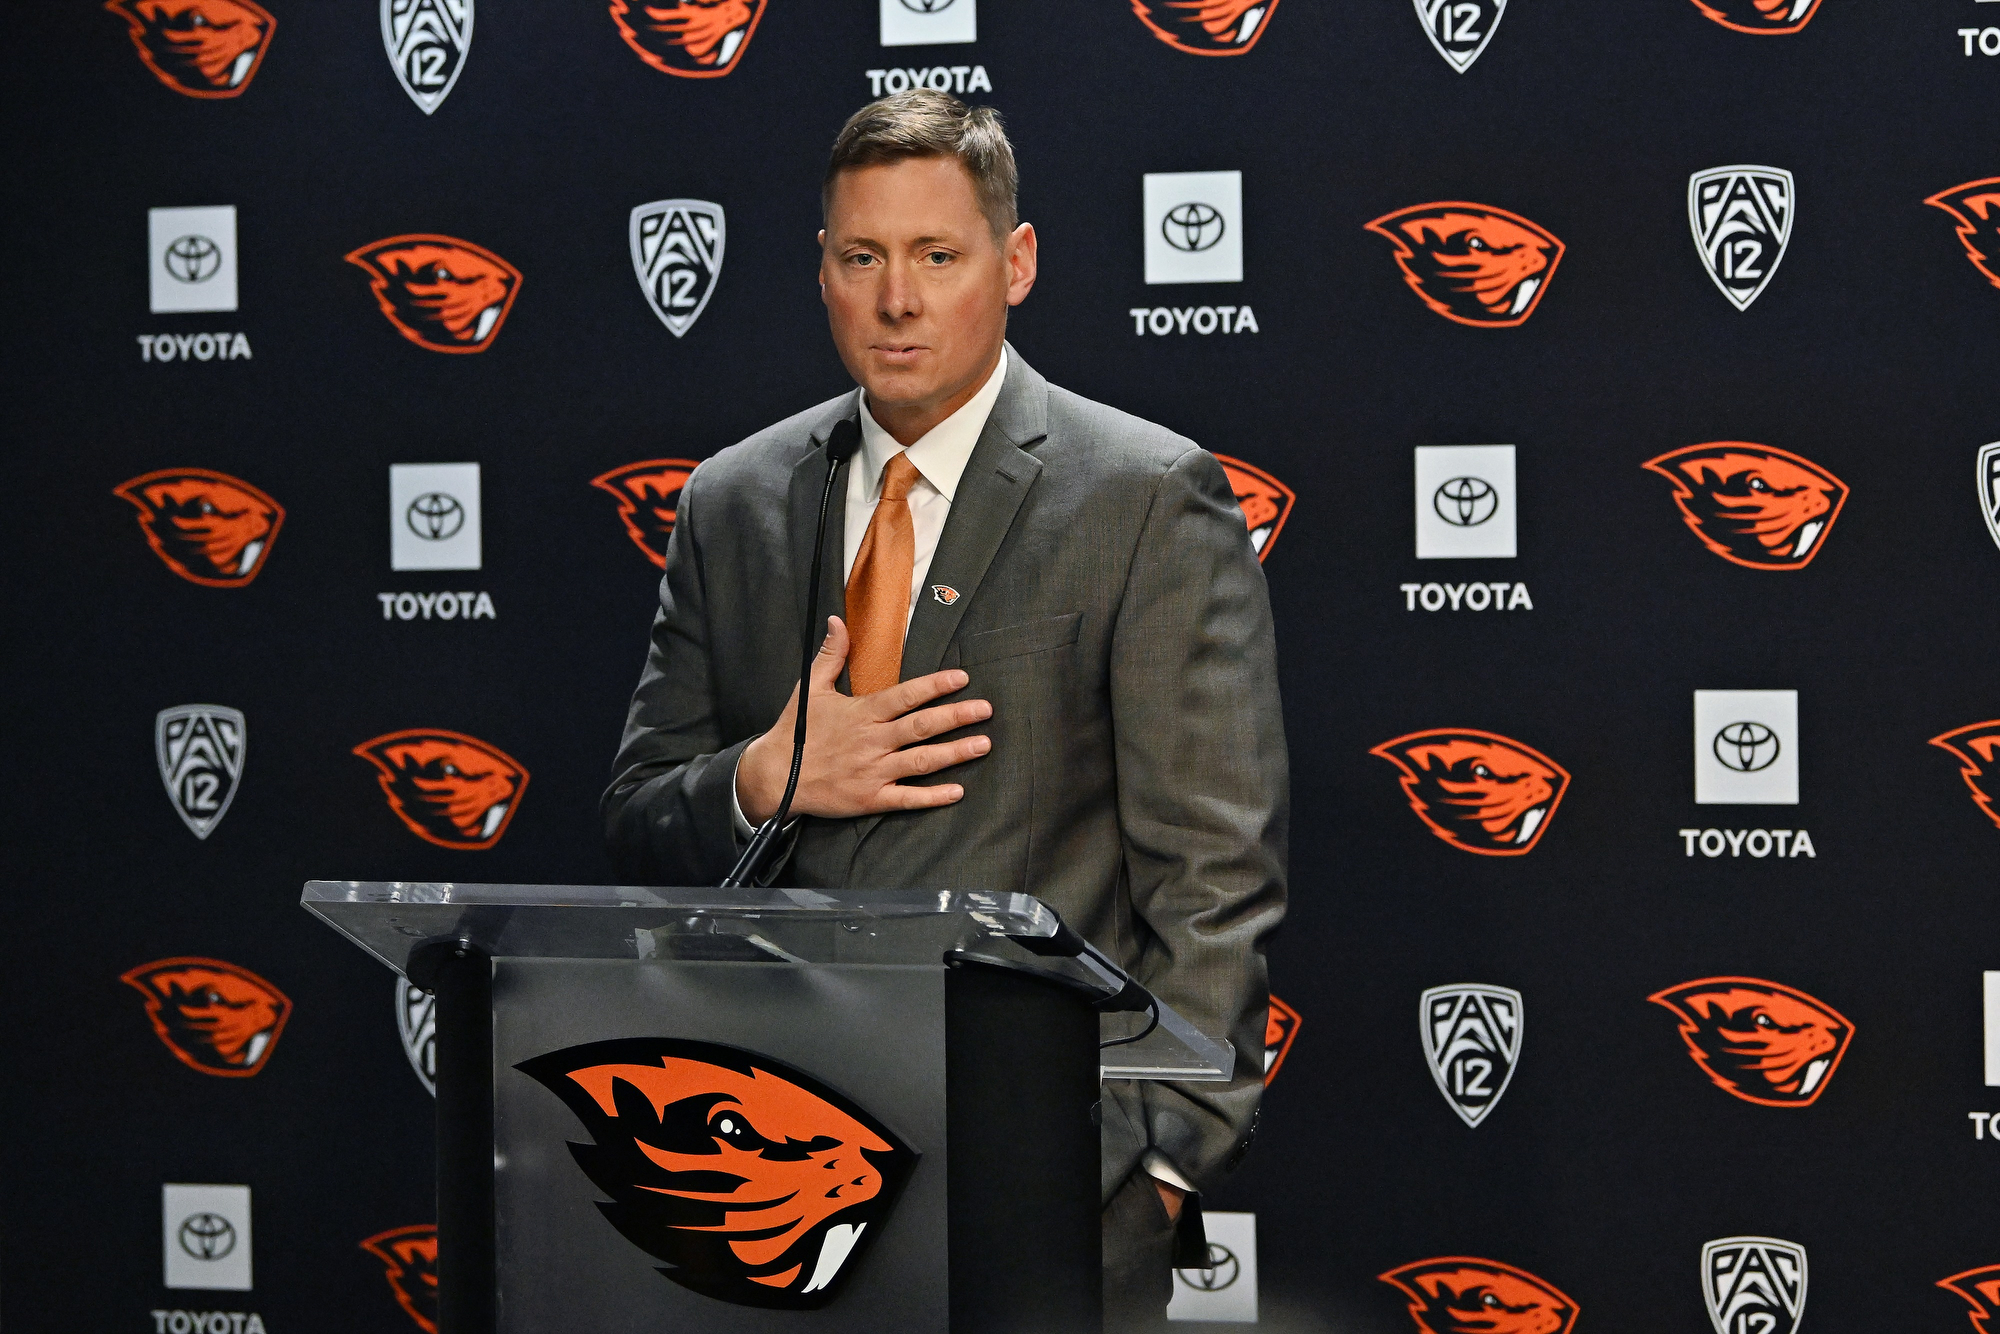 It was fight or flight for new Beavers coach Trent Bray, whose sense of loyalty kept him at Oregon State